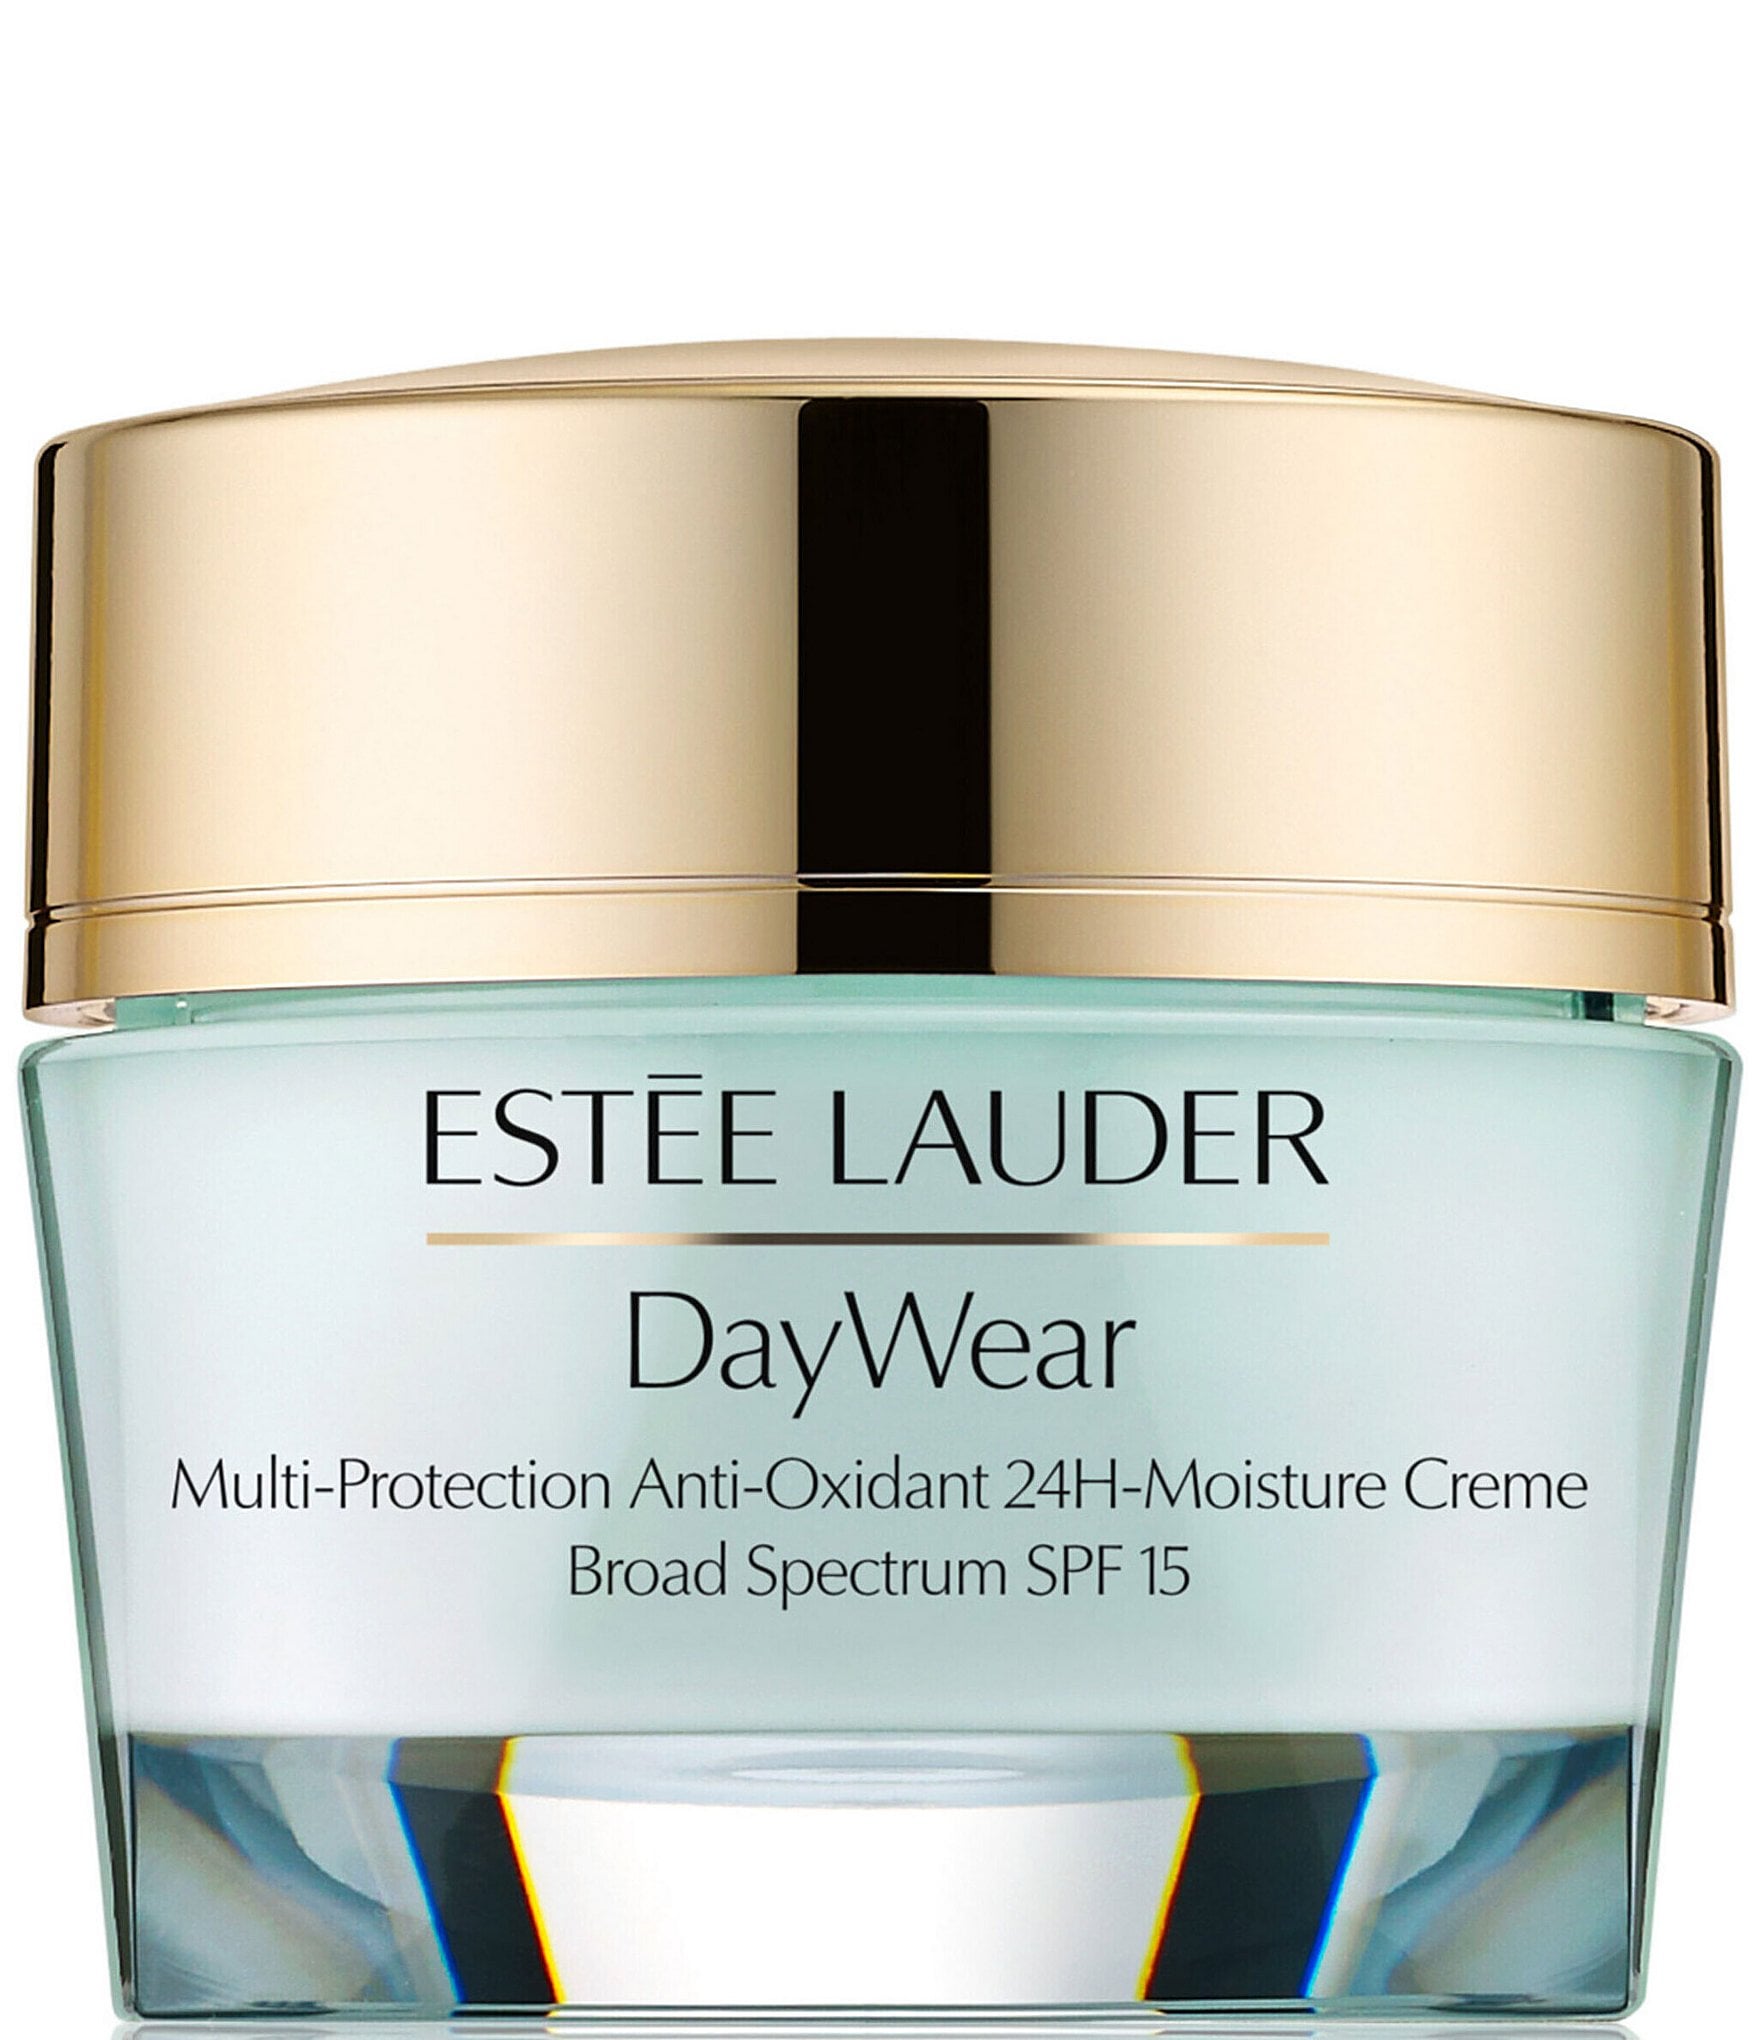 Dermstore Chats With the Experts at Estée Lauder